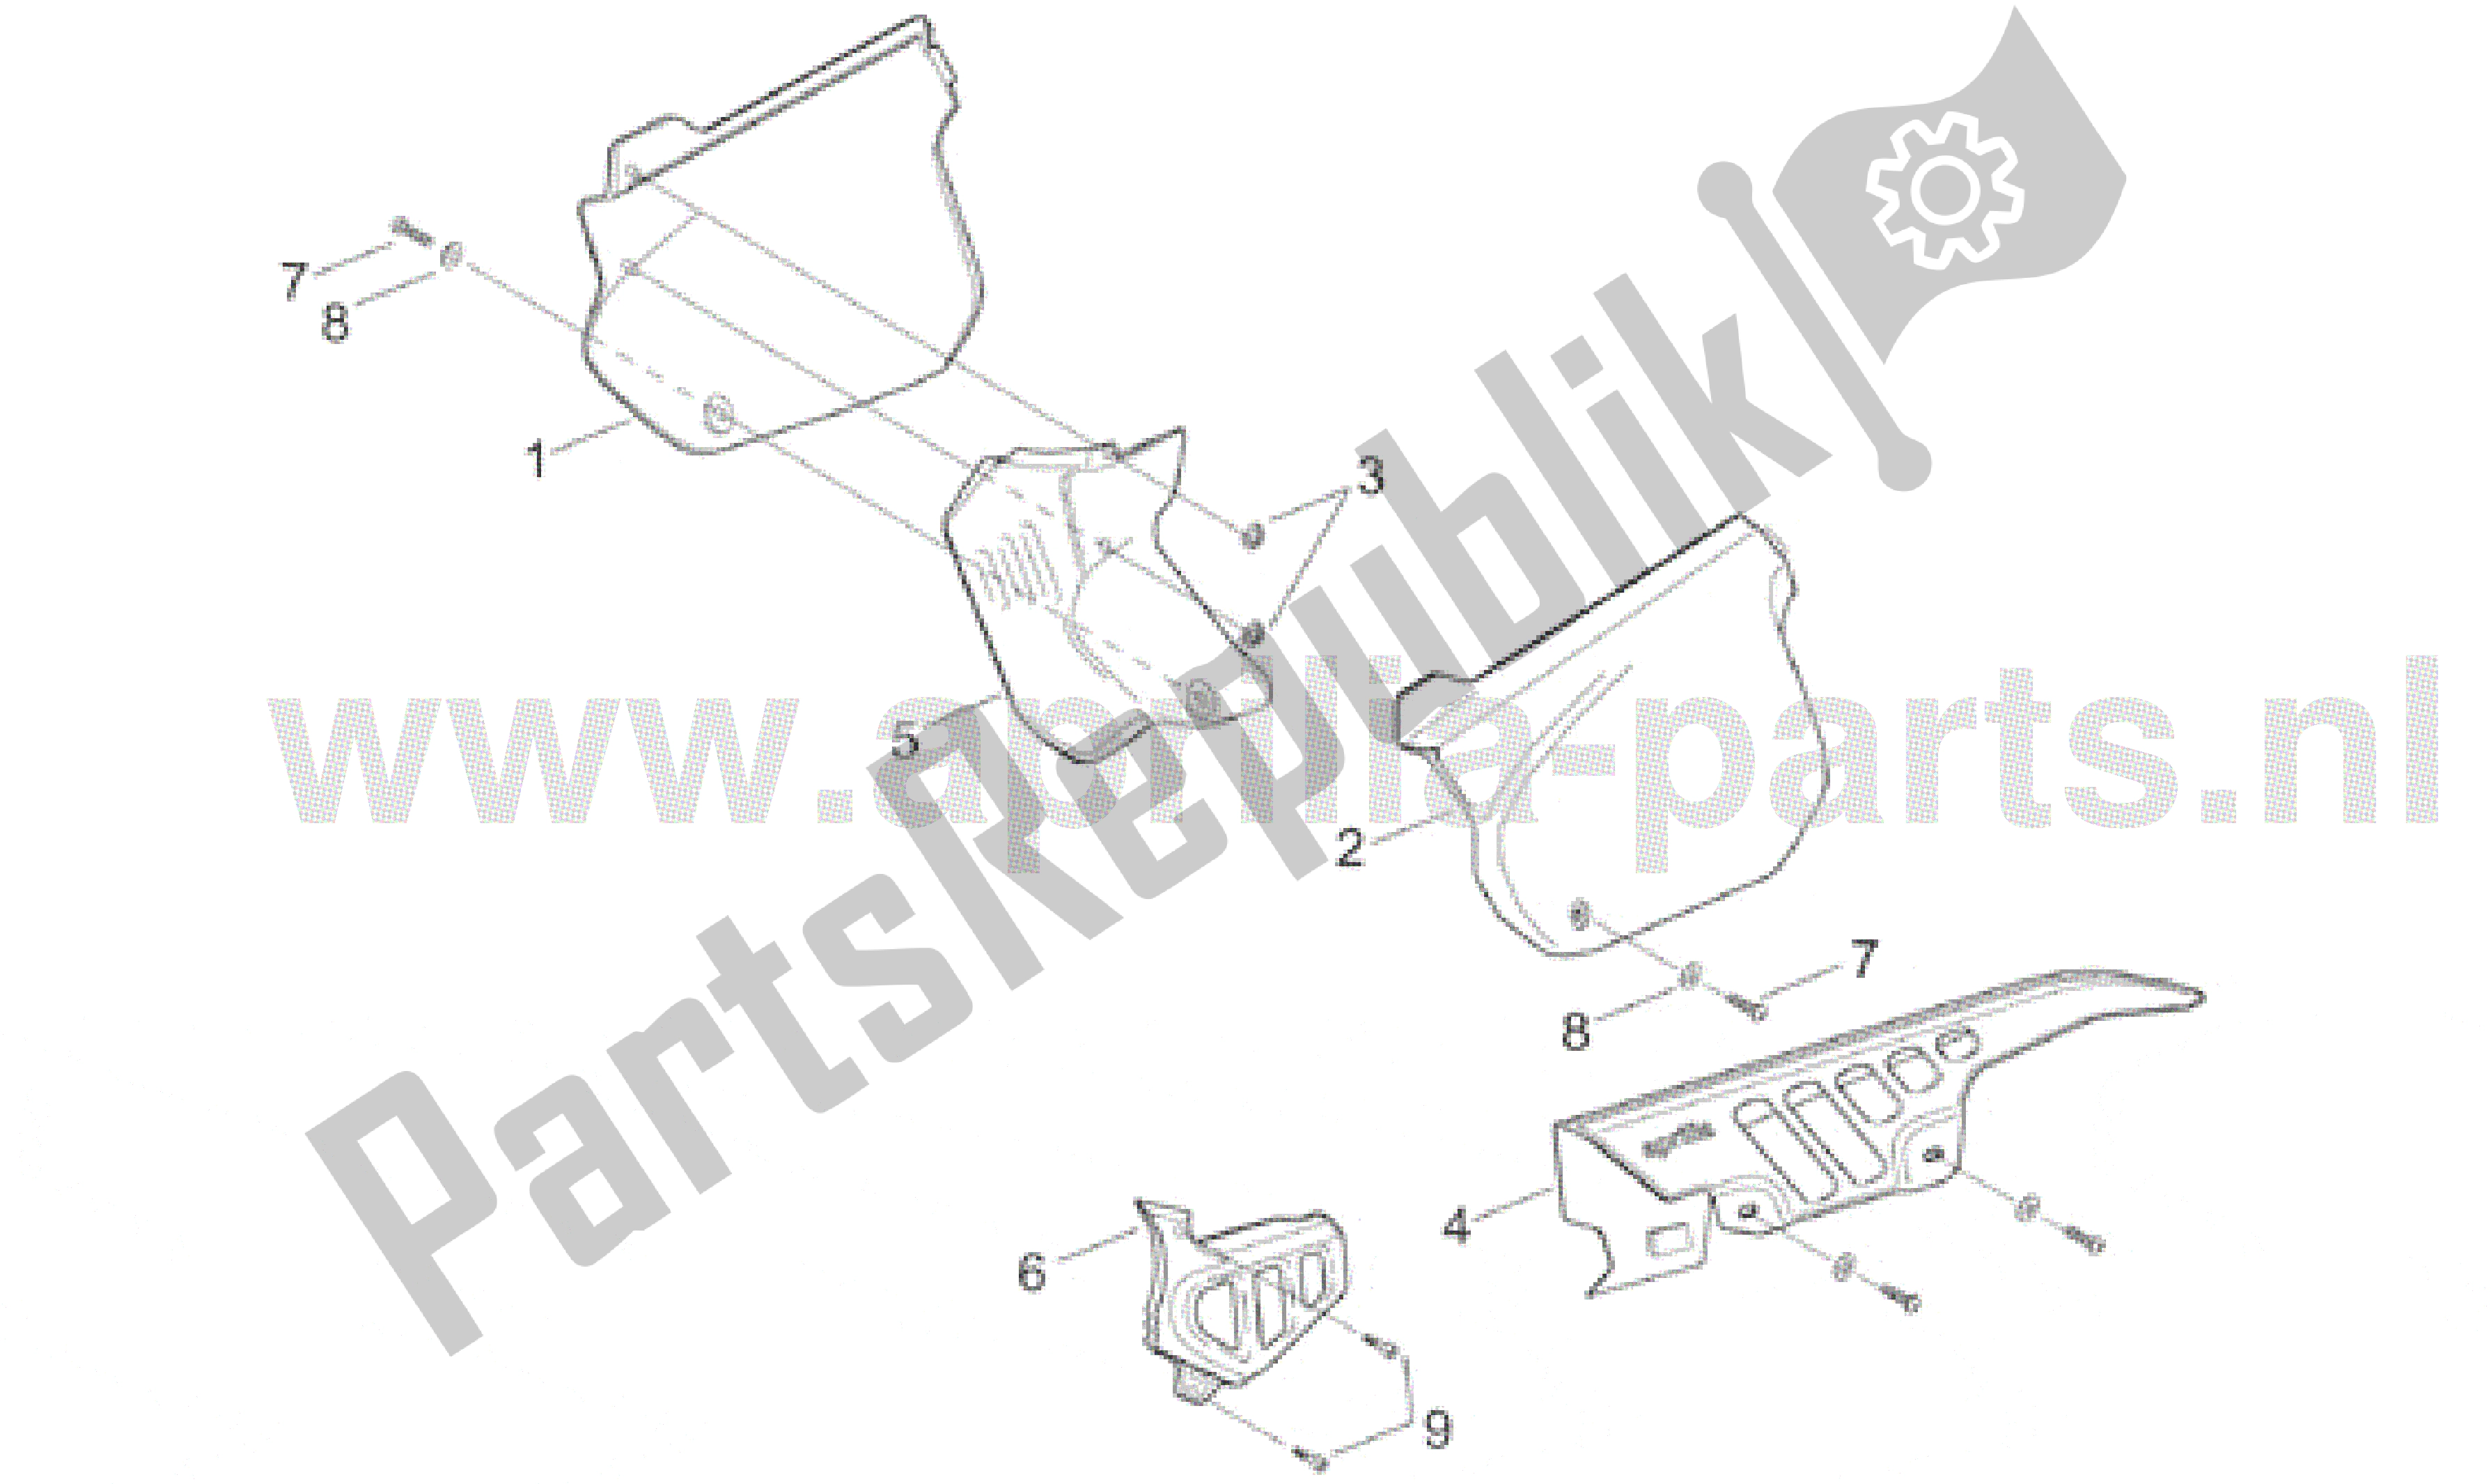 All parts for the Central Body of the Aprilia RX 50 1995 - 2000